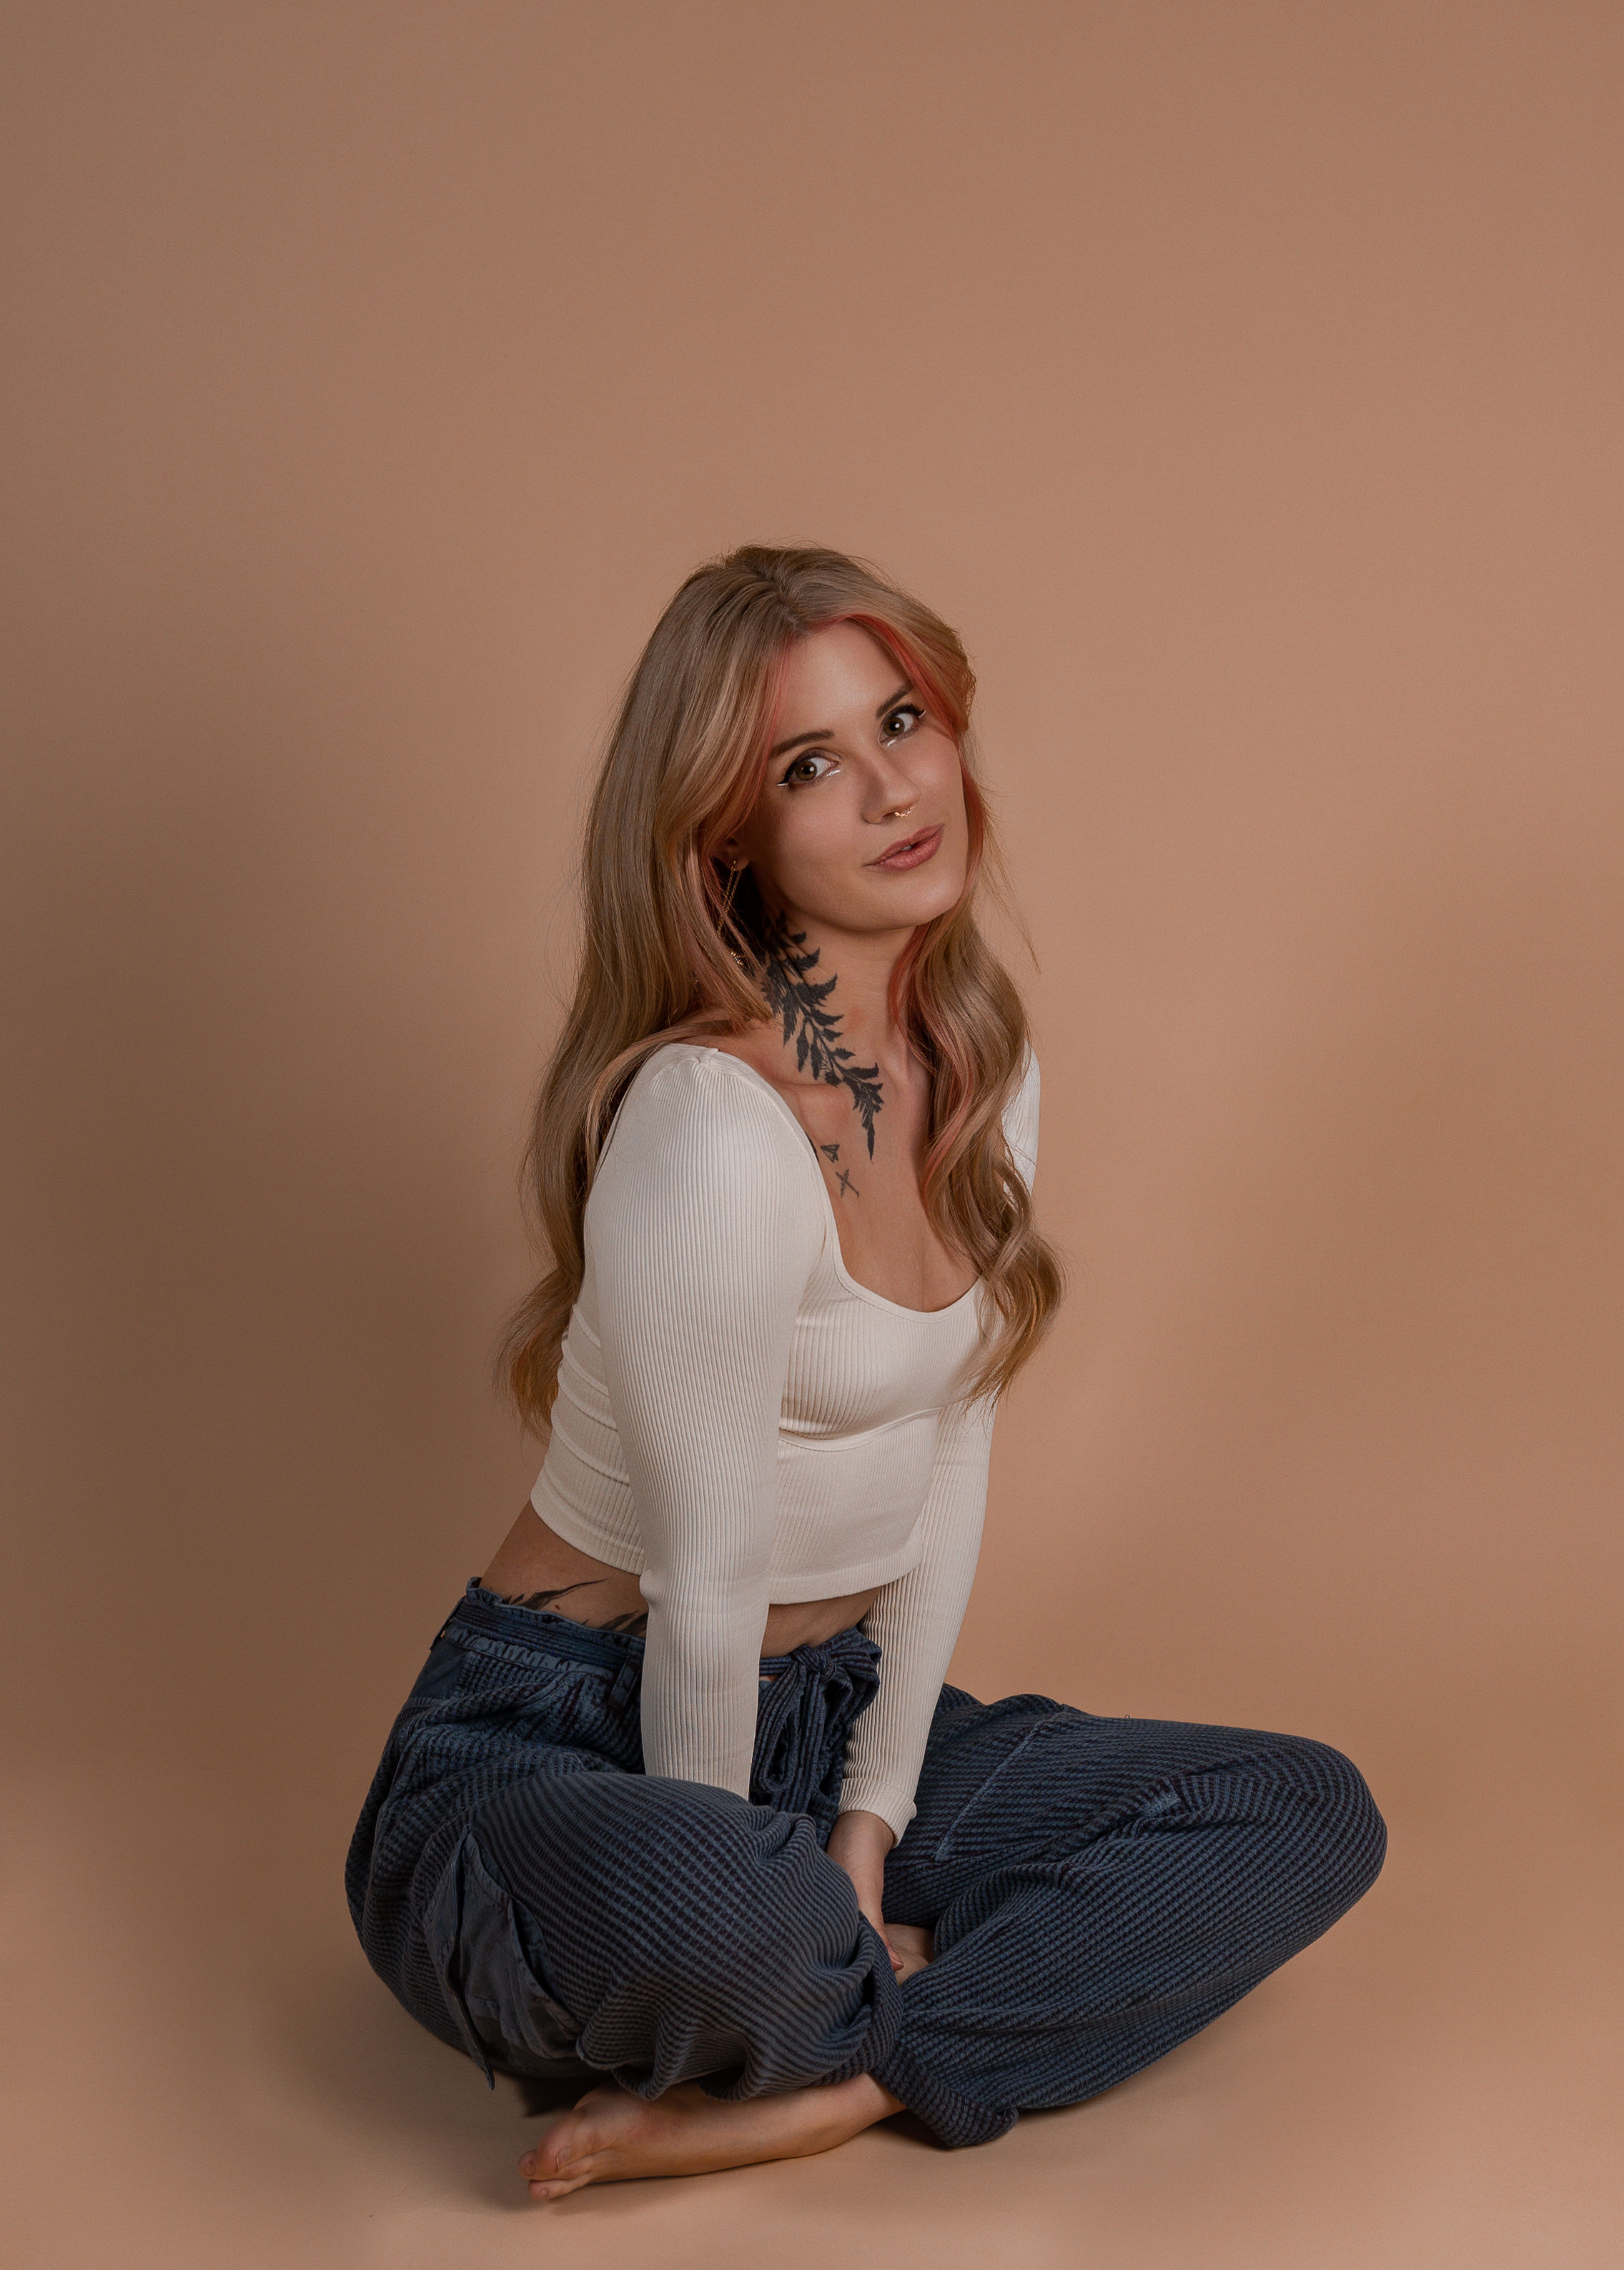 Image of a woman sitting cross legged on the floor. She has long blonde hair with pink highlights and is wearing a white shirt and blue corduroy pants. She has a large tattoo of a branch with leaves on her neck. 